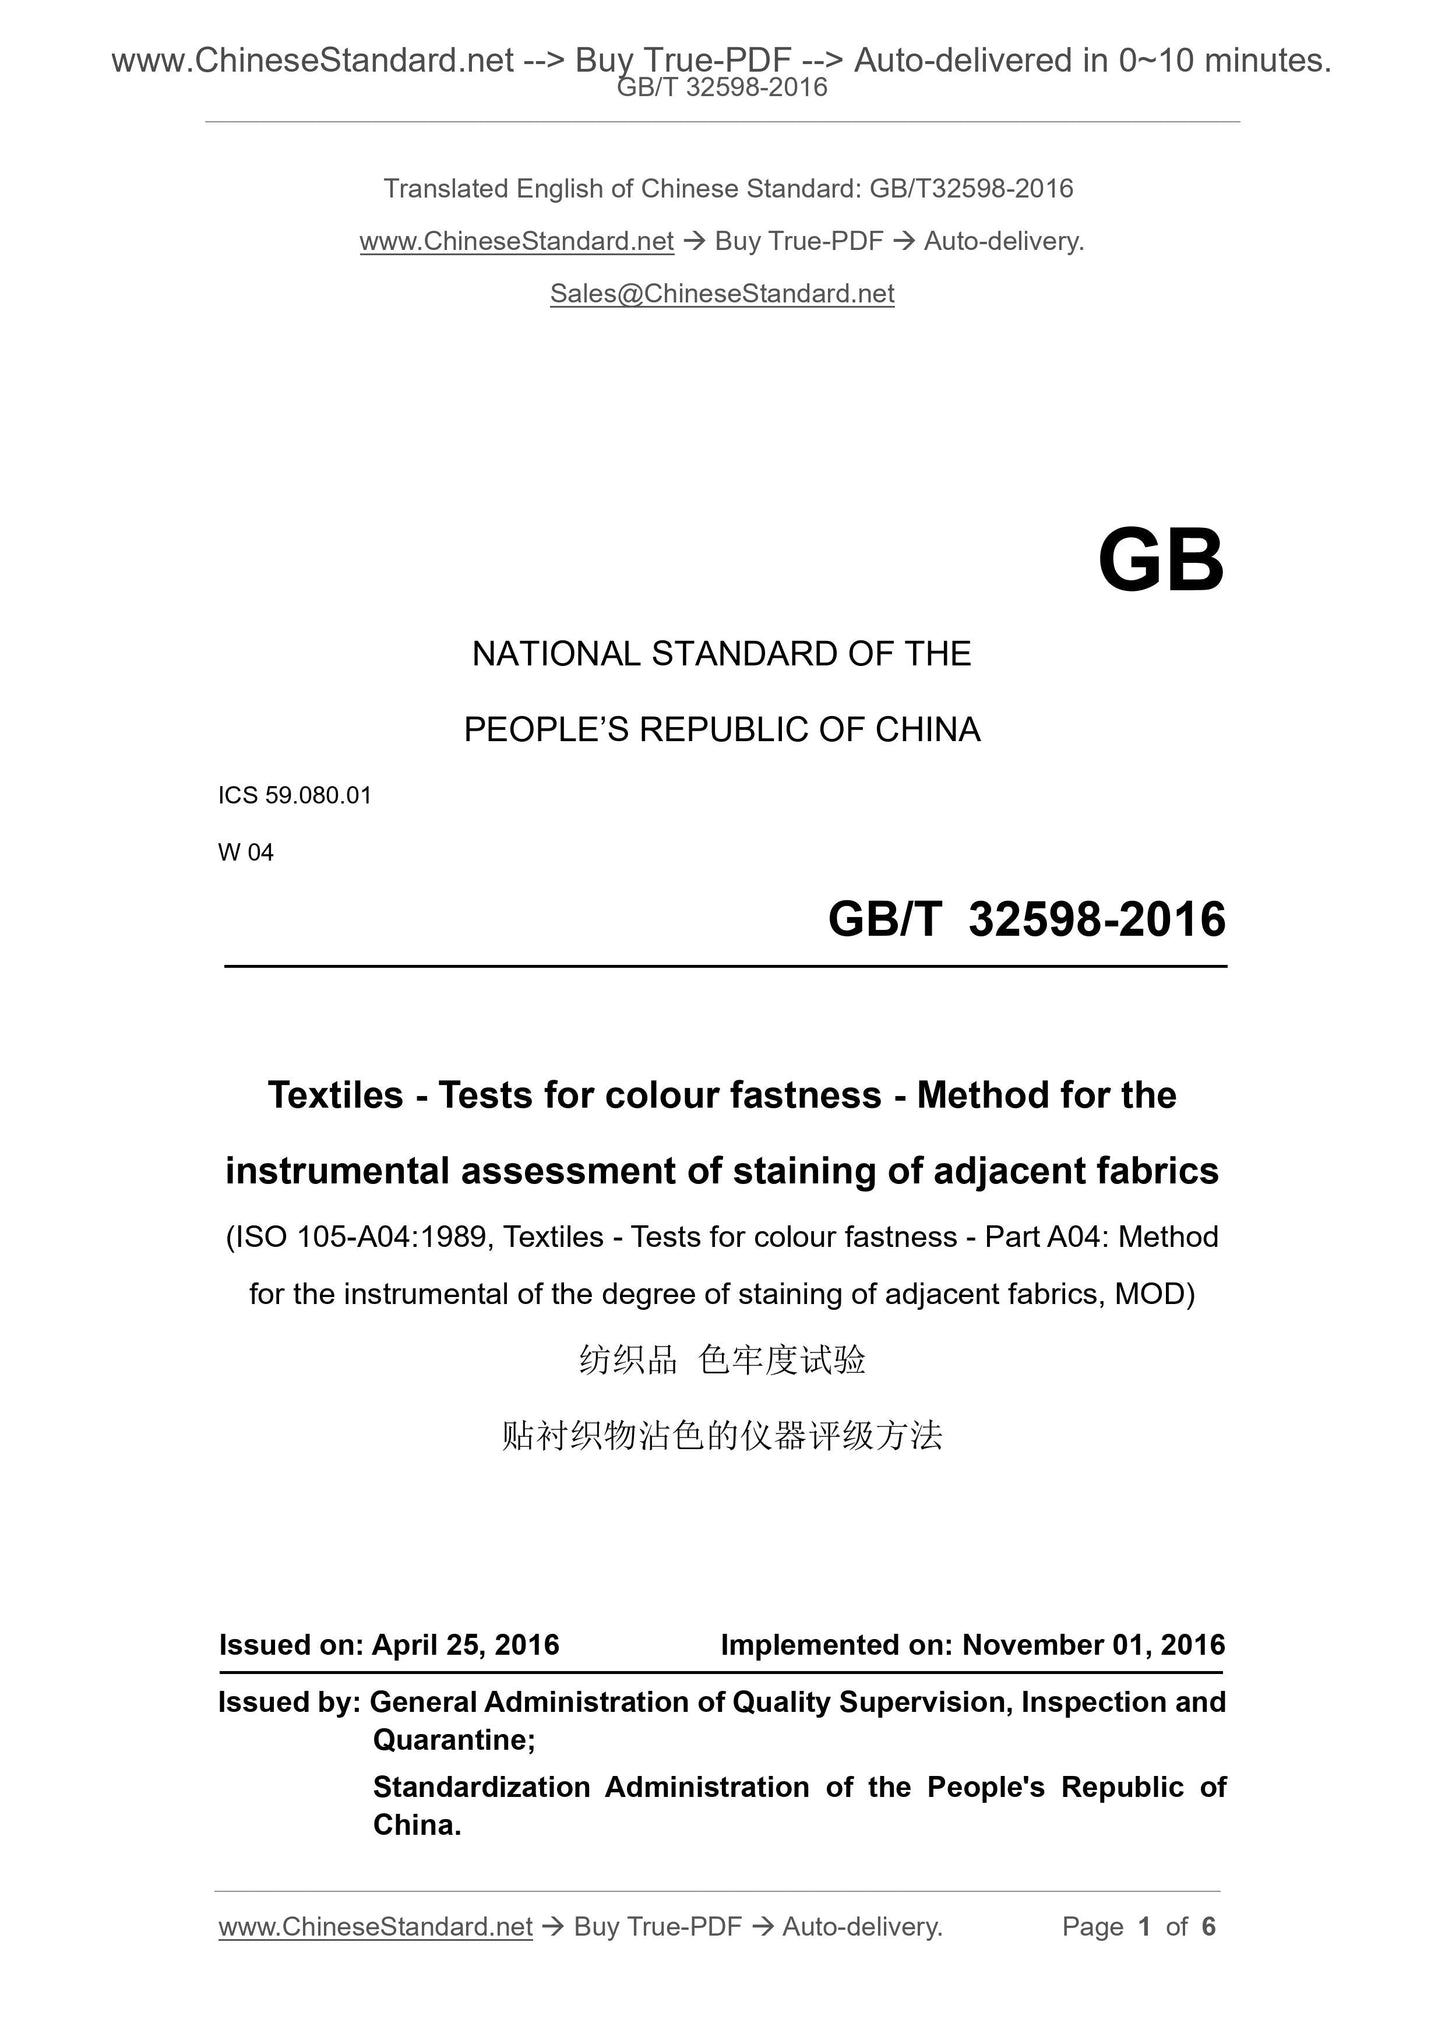 GB/T 32598-2016 Page 1